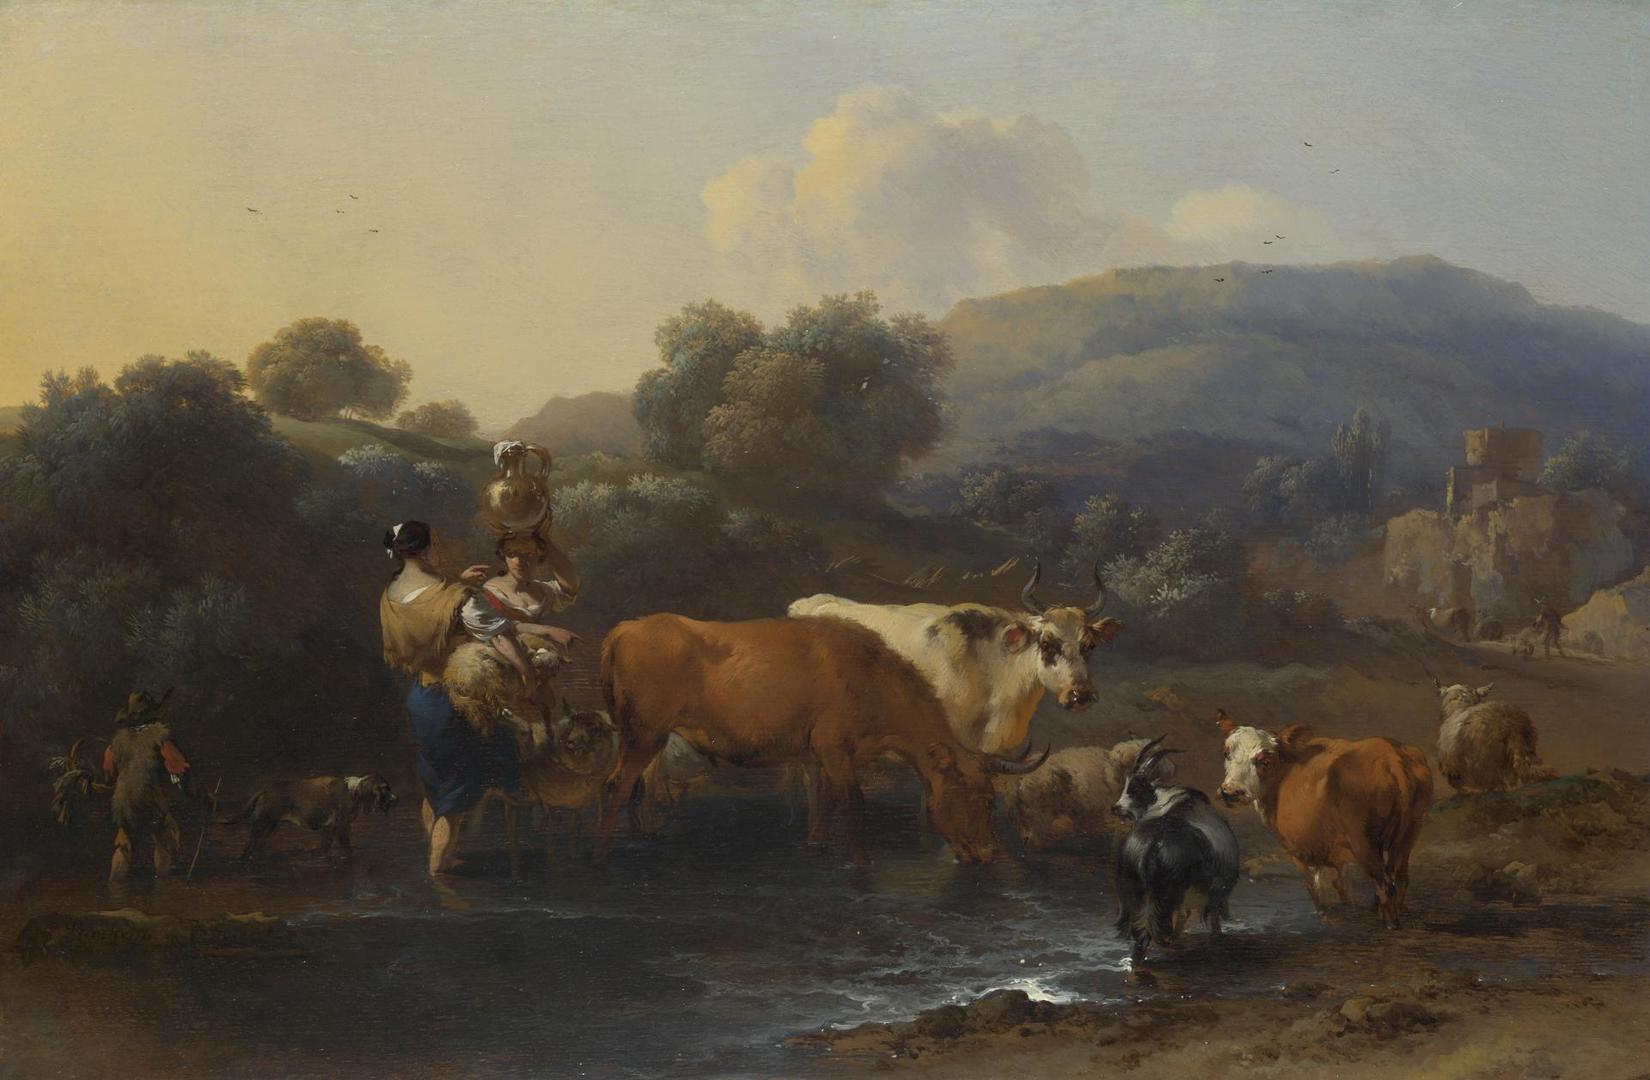 Peasants with Cattle fording a Stream by Nicolaes Berchem